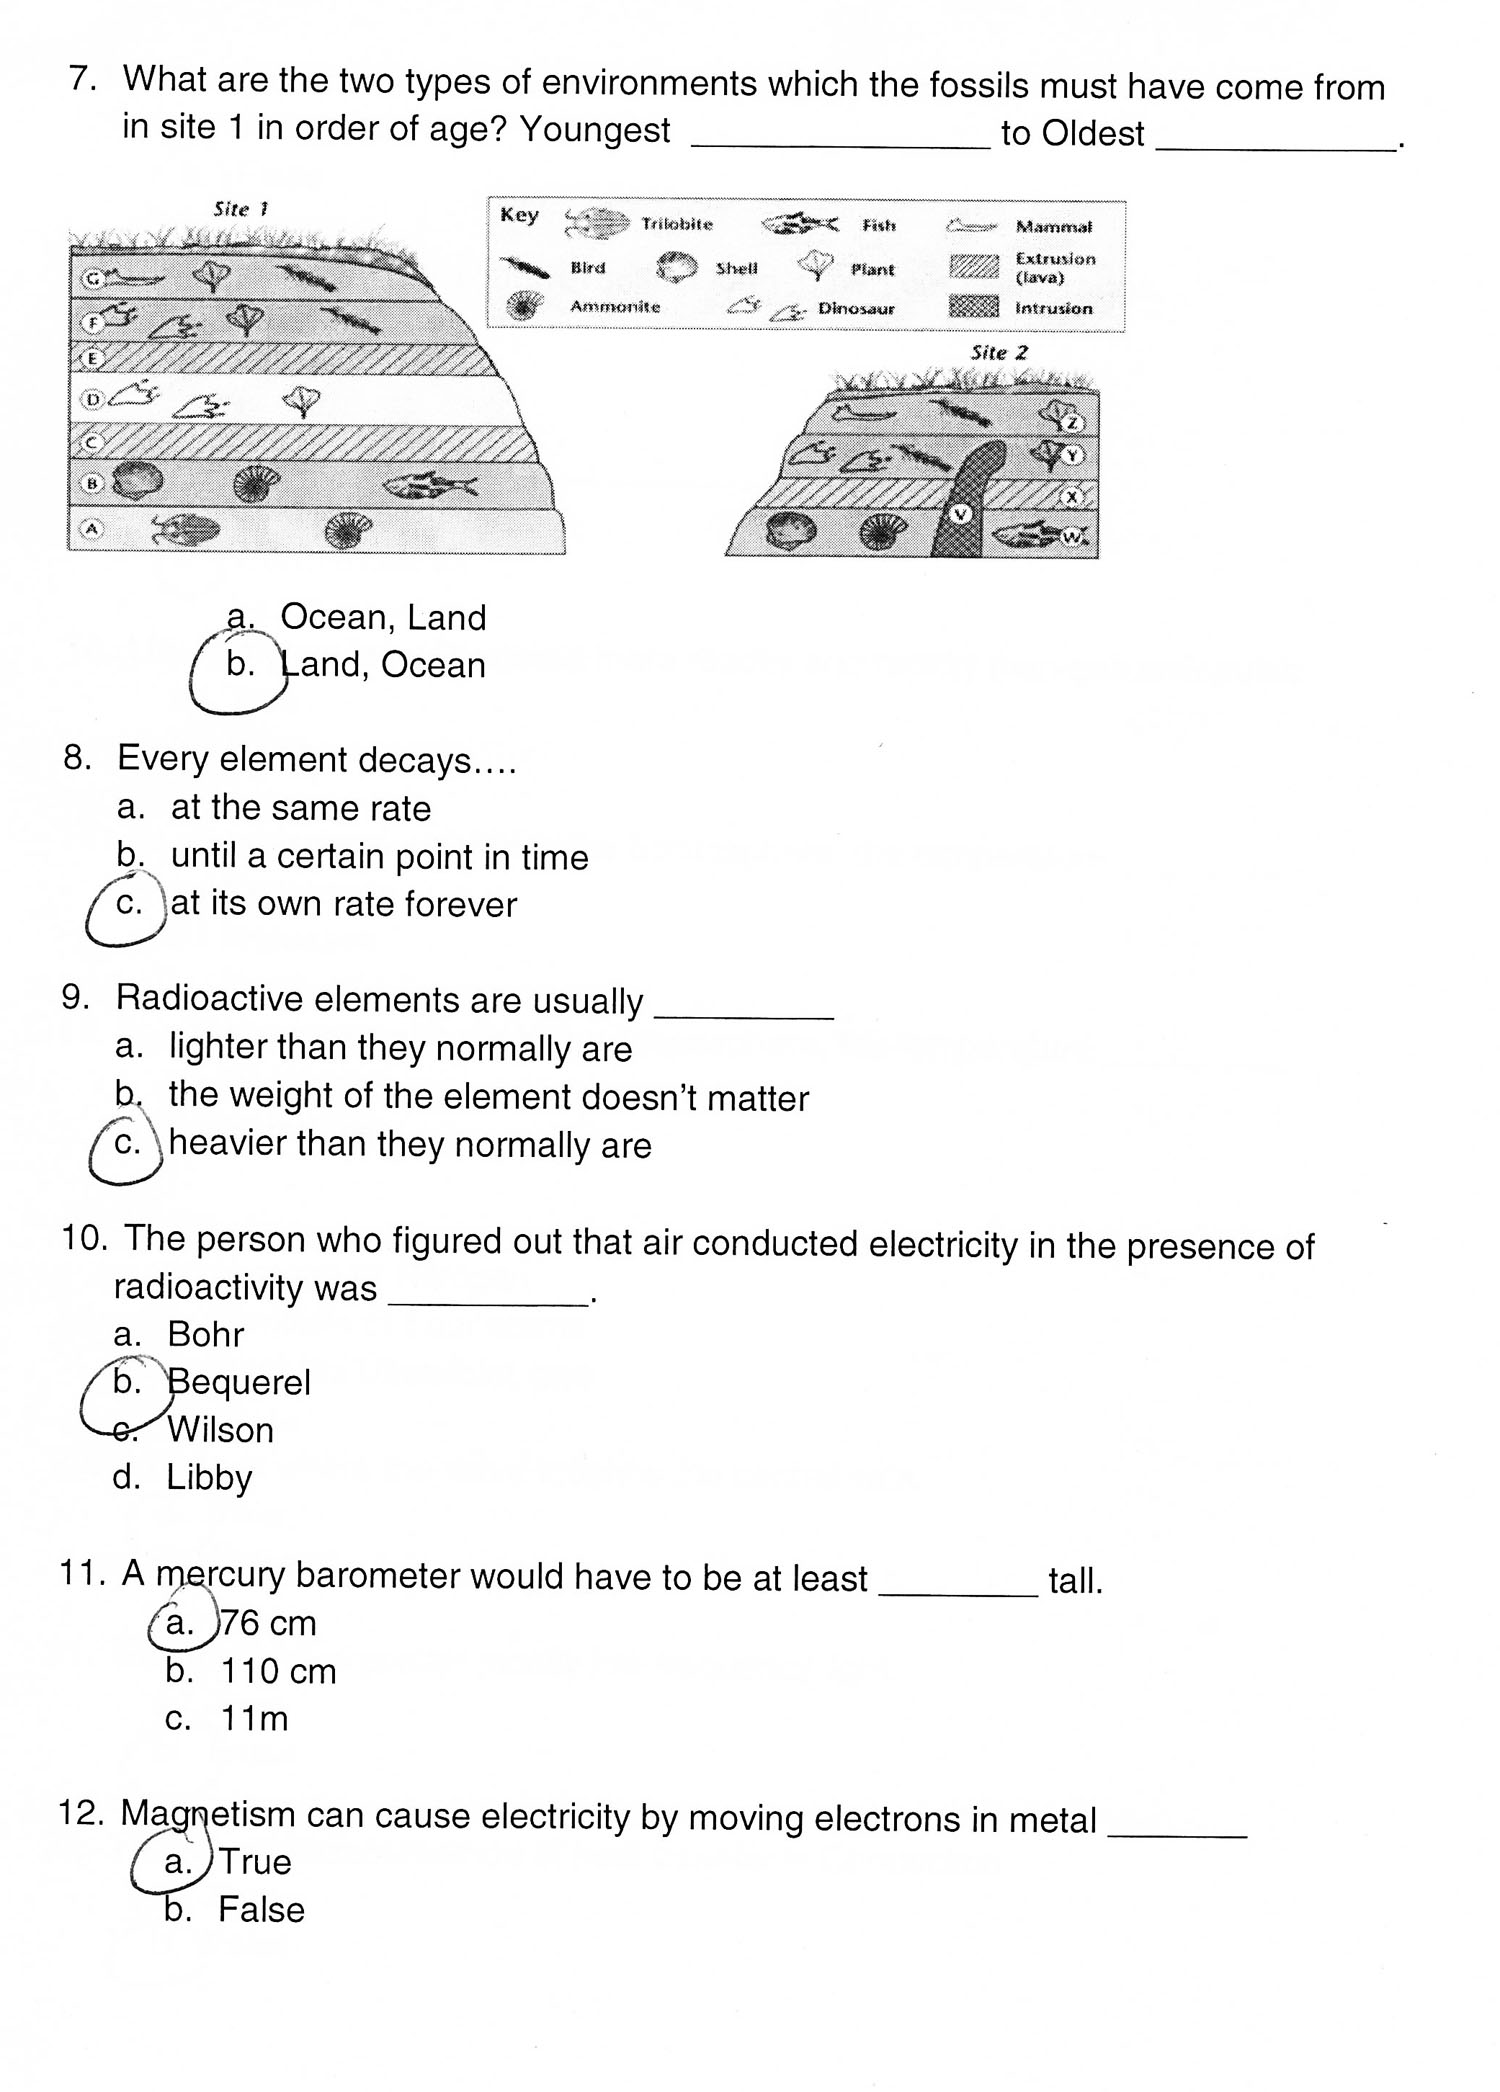 17 Best Images of English Worksheets For 8th Graders - 8th ...